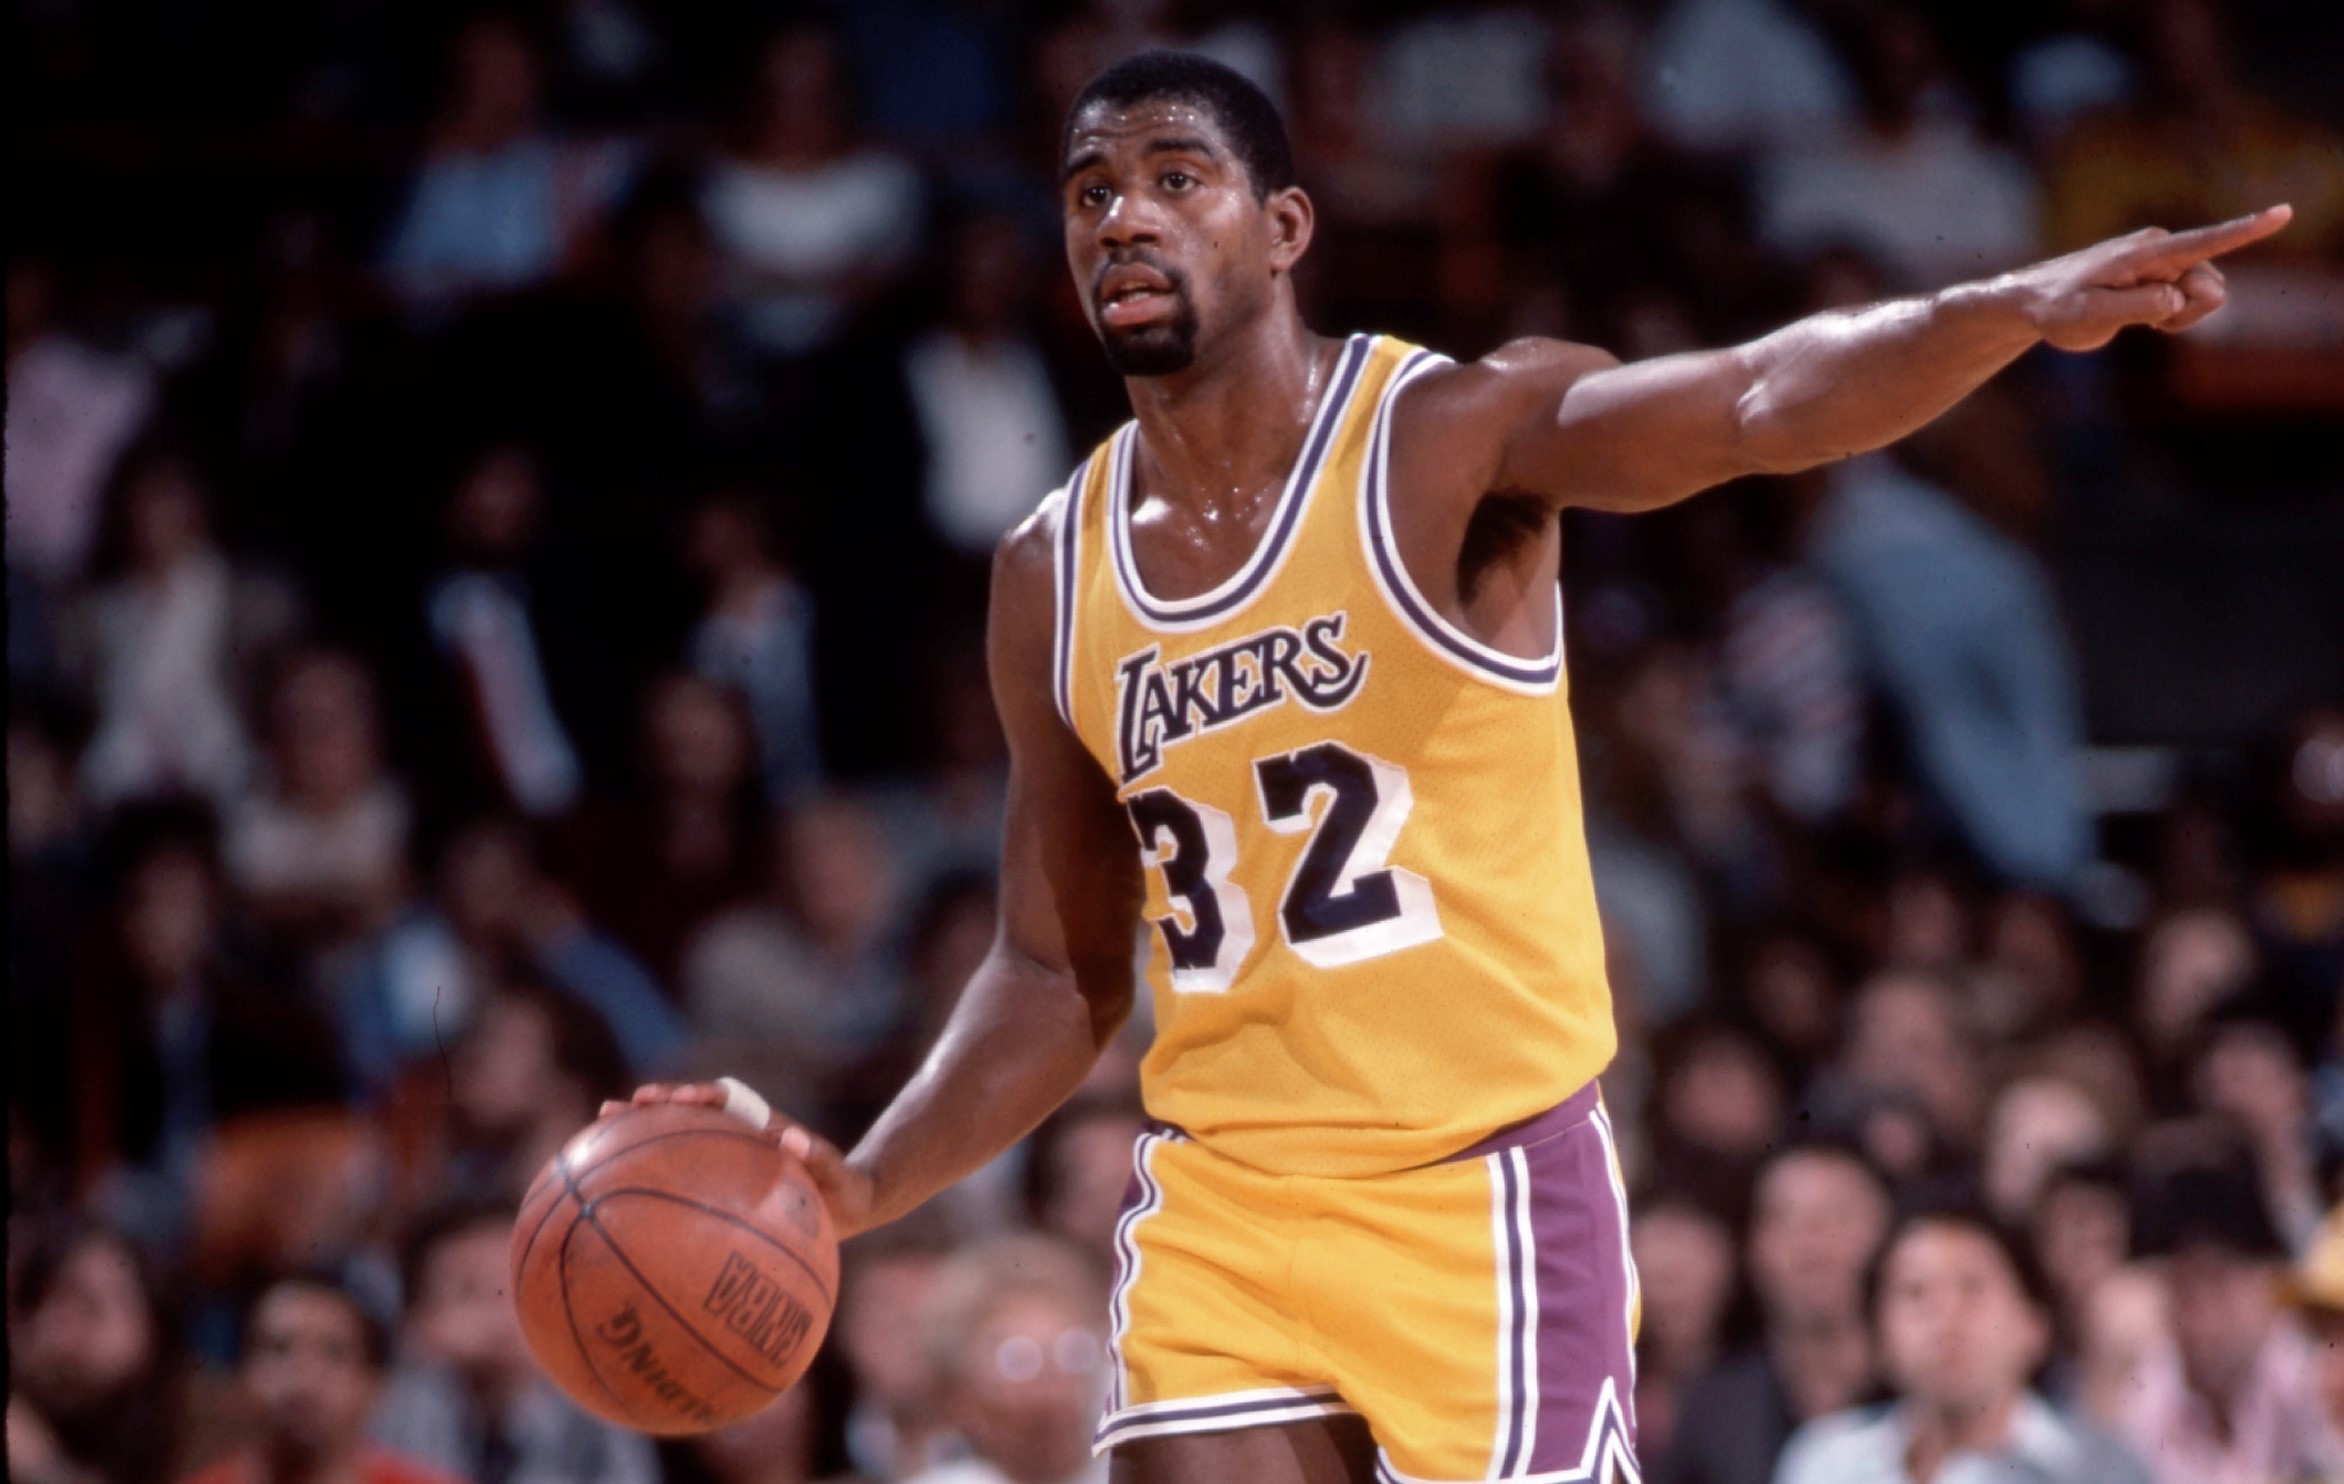 Magic Johnson of the Los Angeles Lakers dribbles up court.